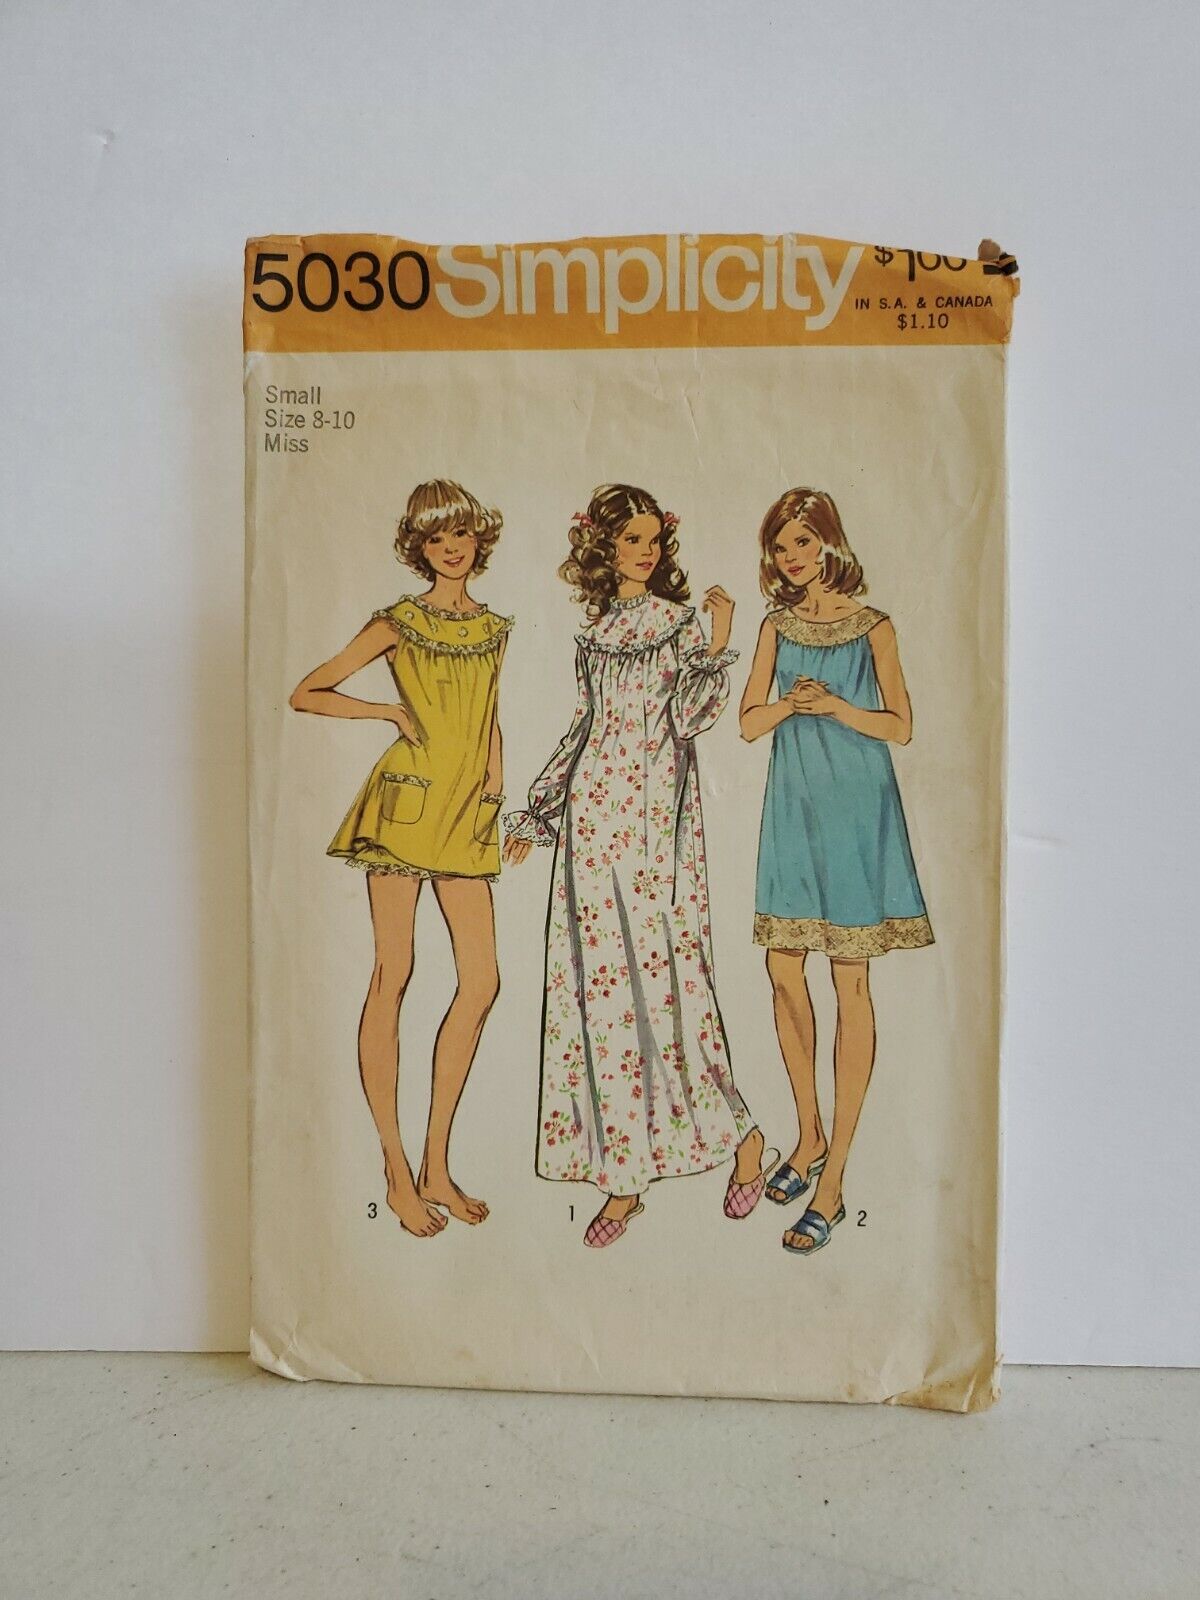 Vtg 1972 Simplicity Pattern 5030 Babydoll Pajamas, Nightgown Sz S 8-10 Complete 